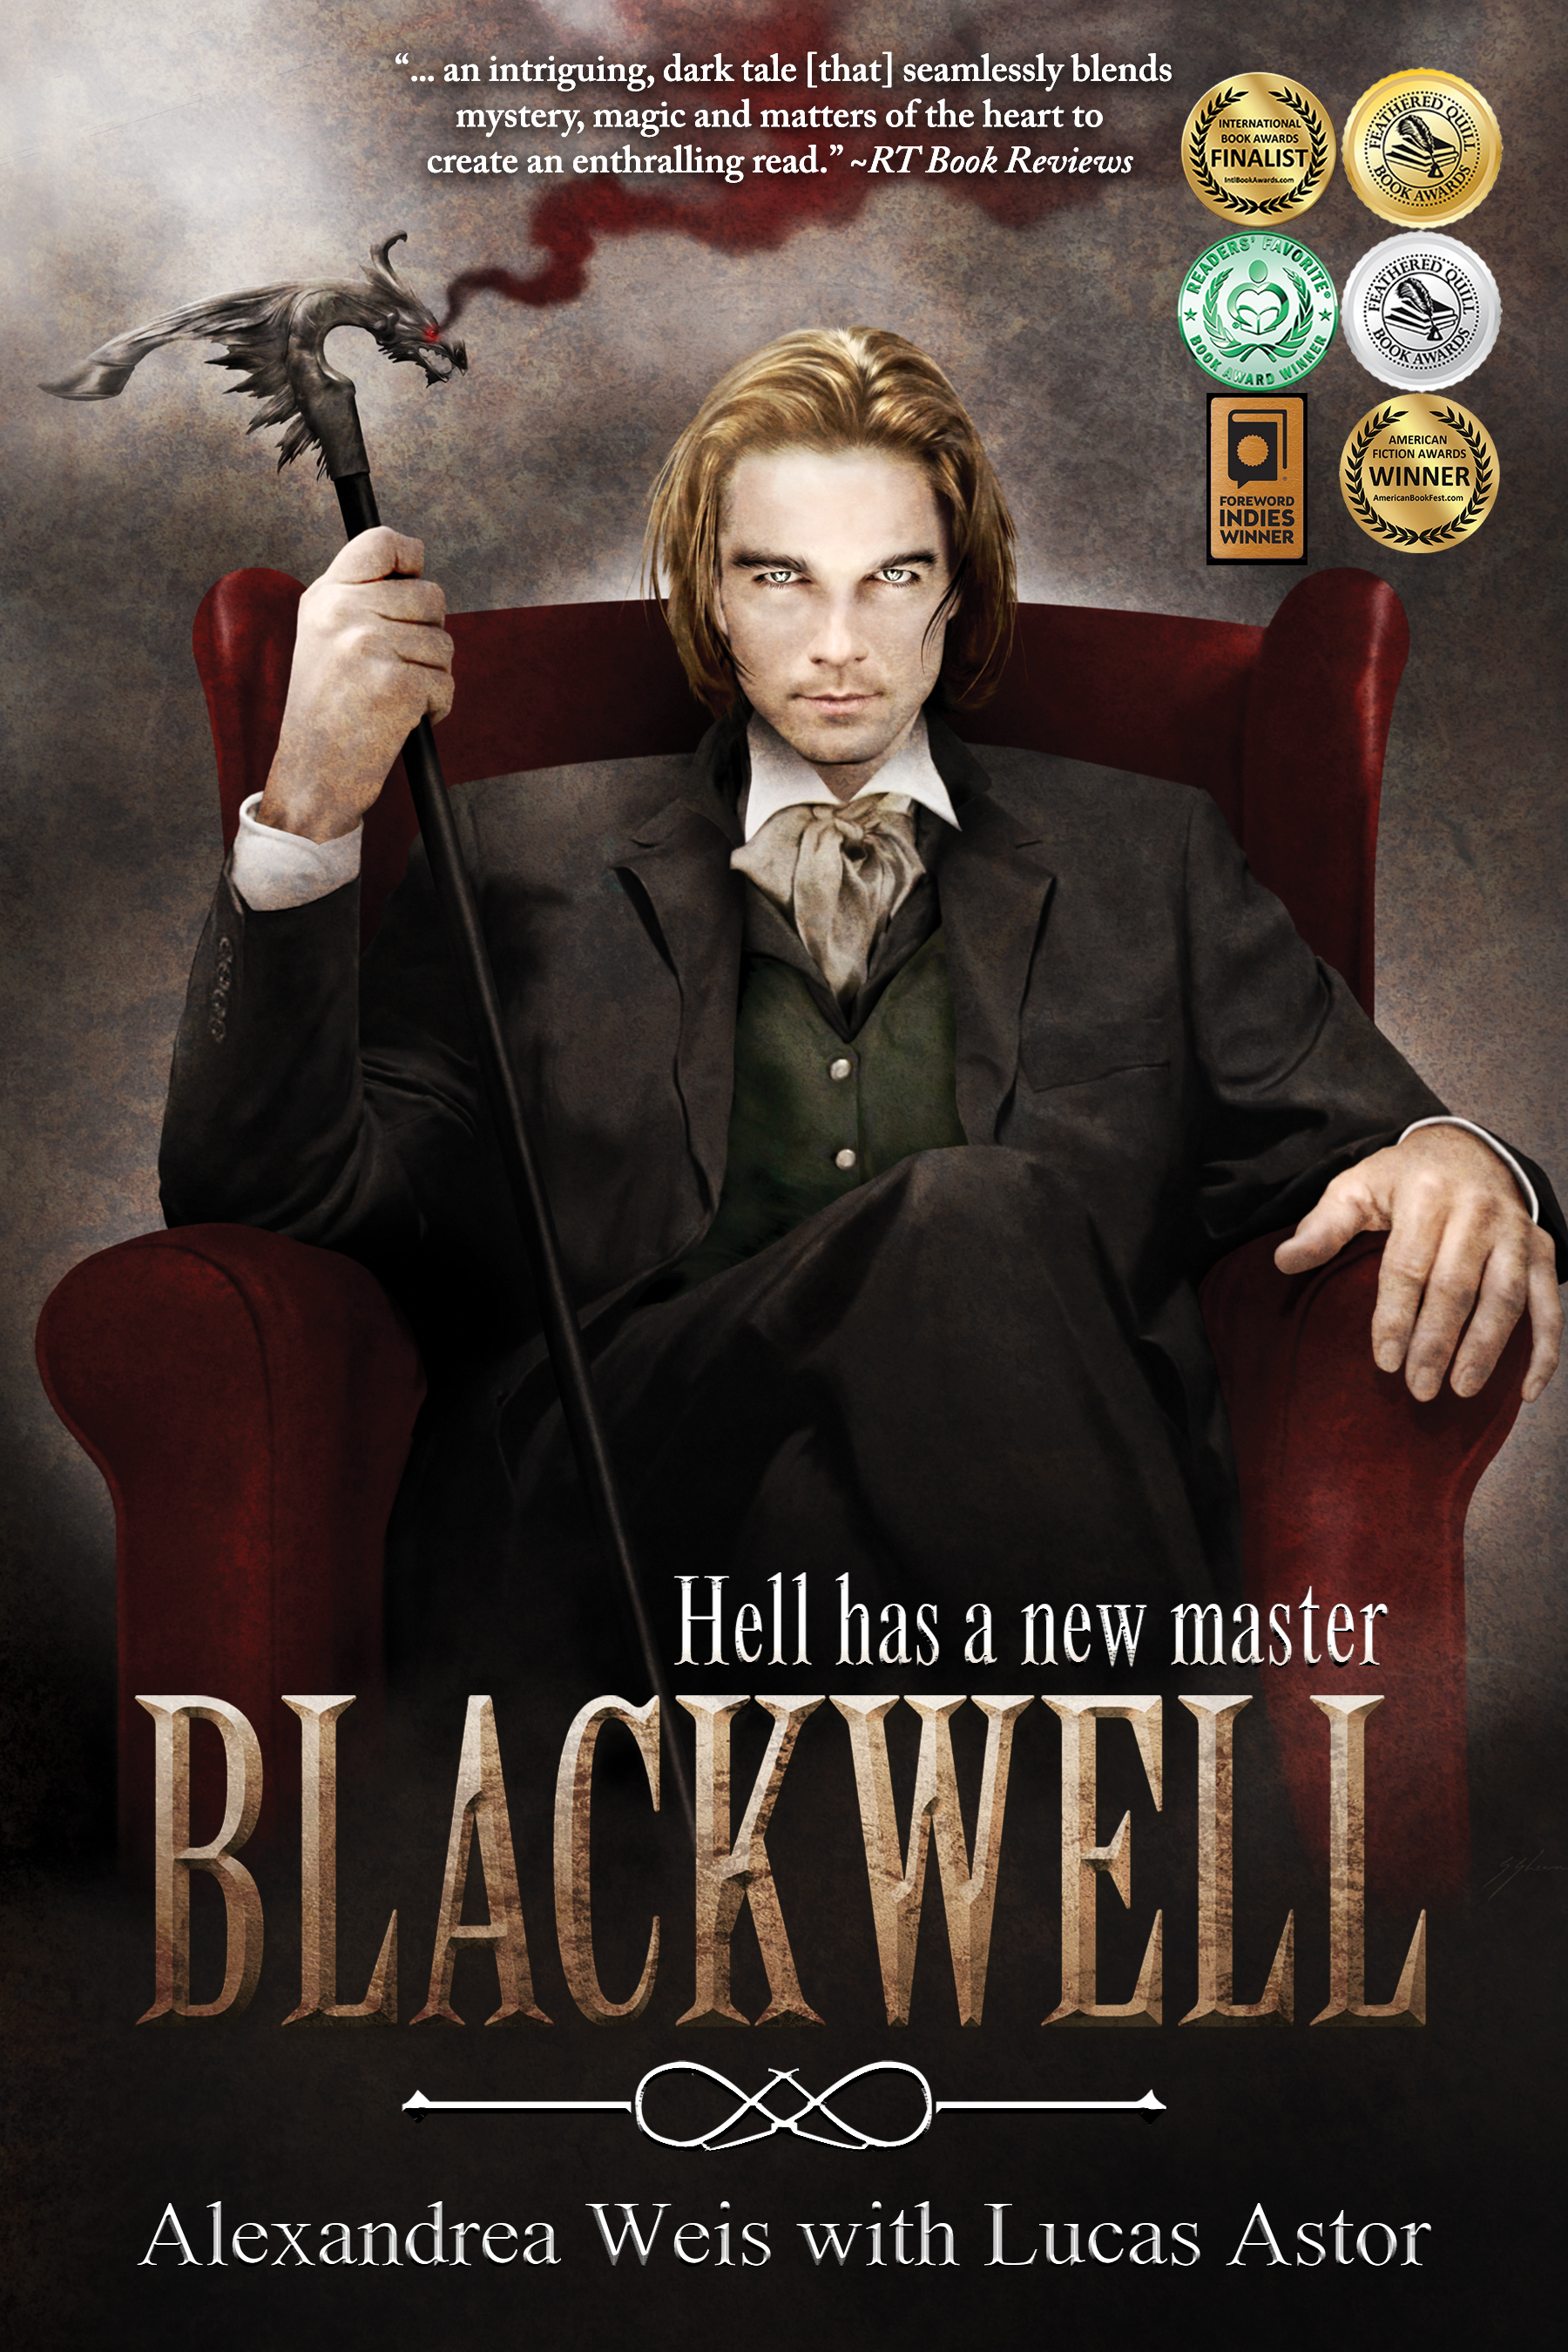 Blackwell by Alexandrea Weis with Lucas Astor